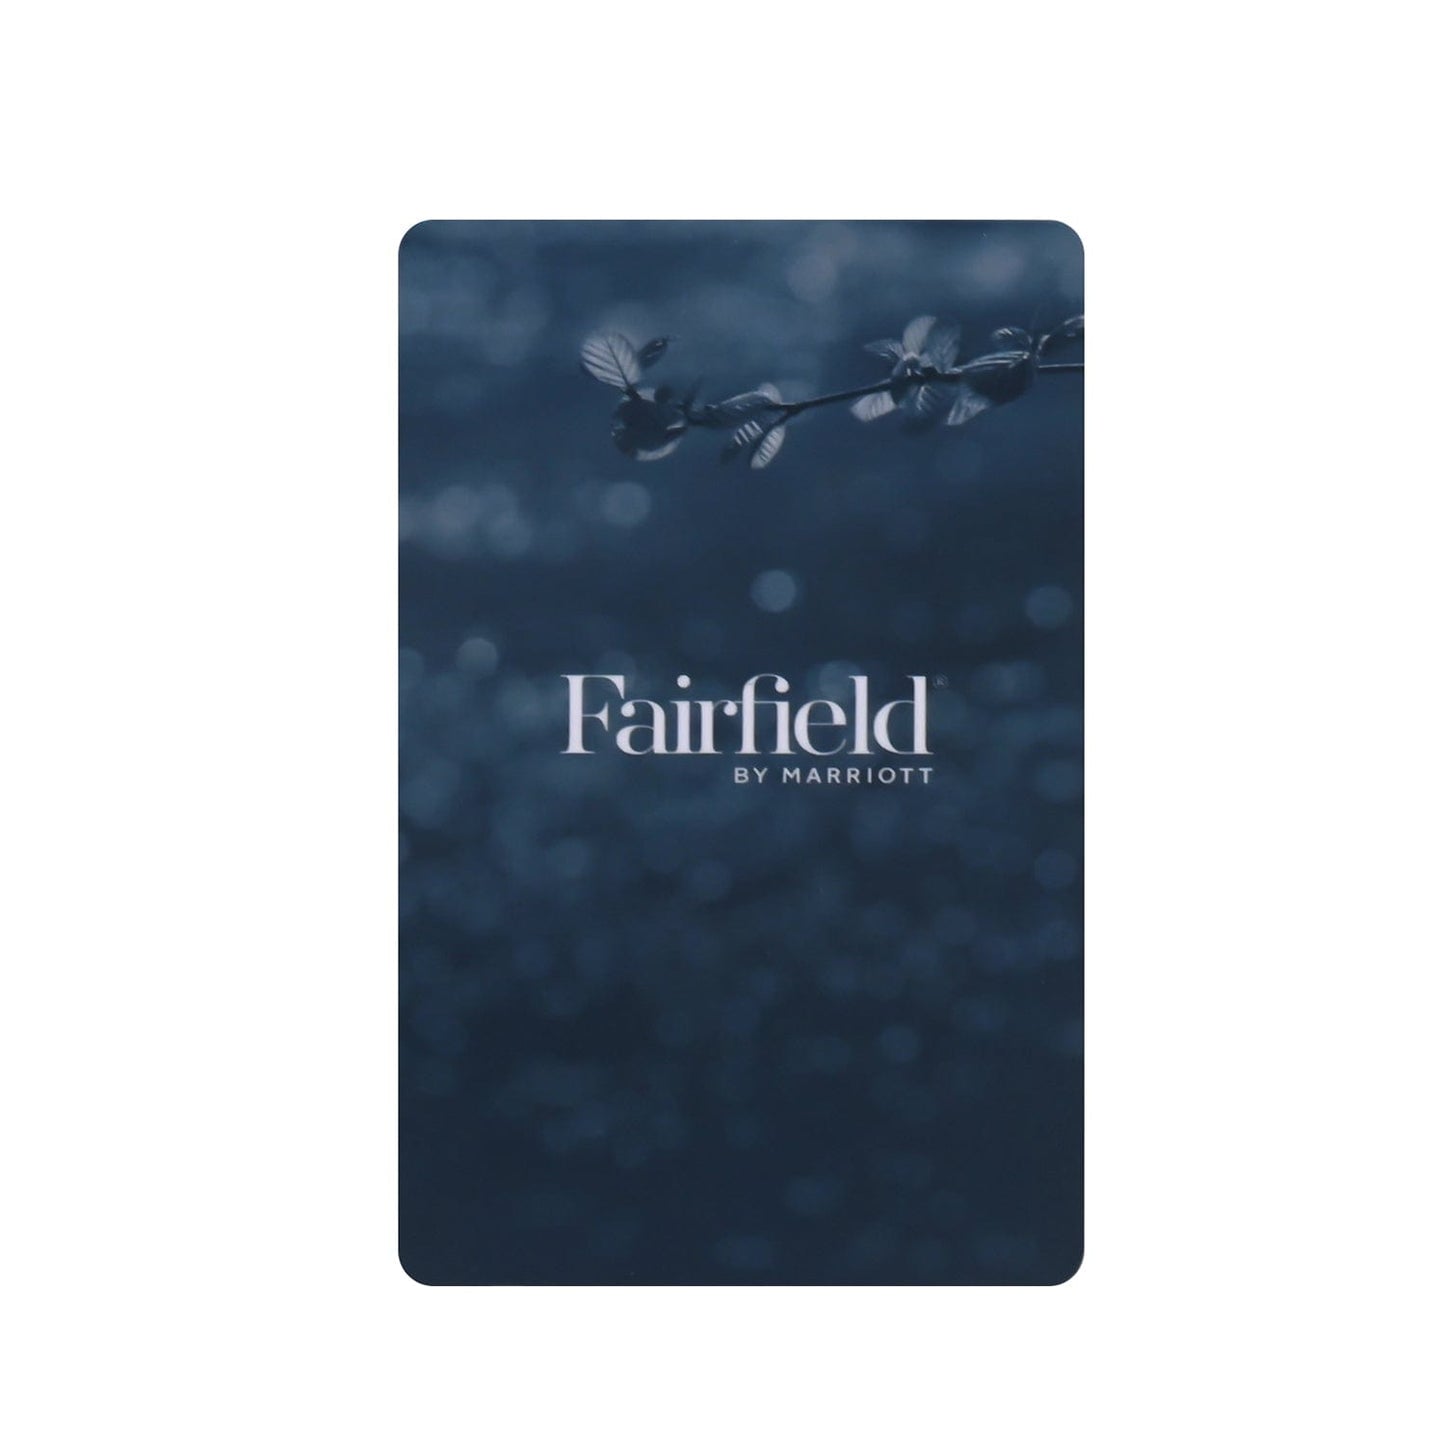 Fairfield 1K RFID Key Cards Compatible with Assa Abloy* Guest Lock Systems-See Description (Sold in boxes of 200)